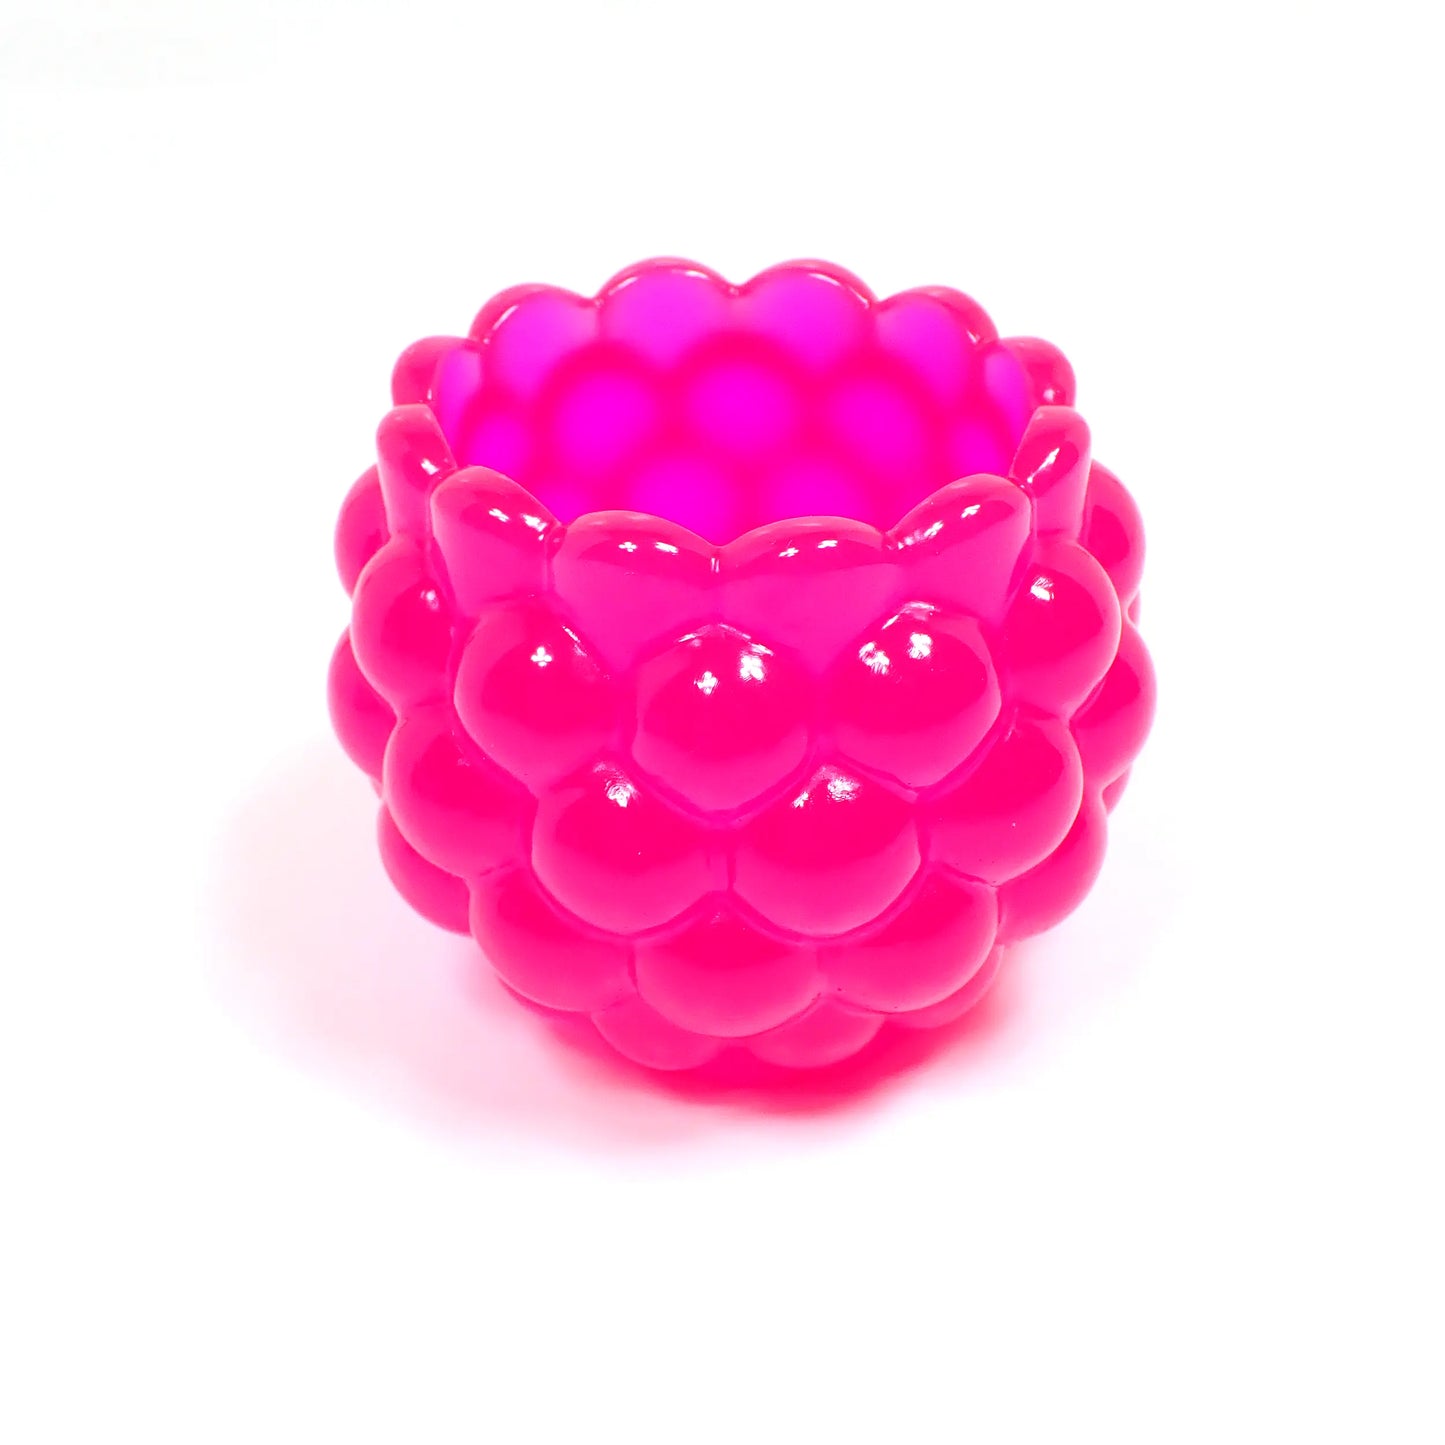 Small Handmade Round Neon Pink Resin Pot with Scalloped Edge